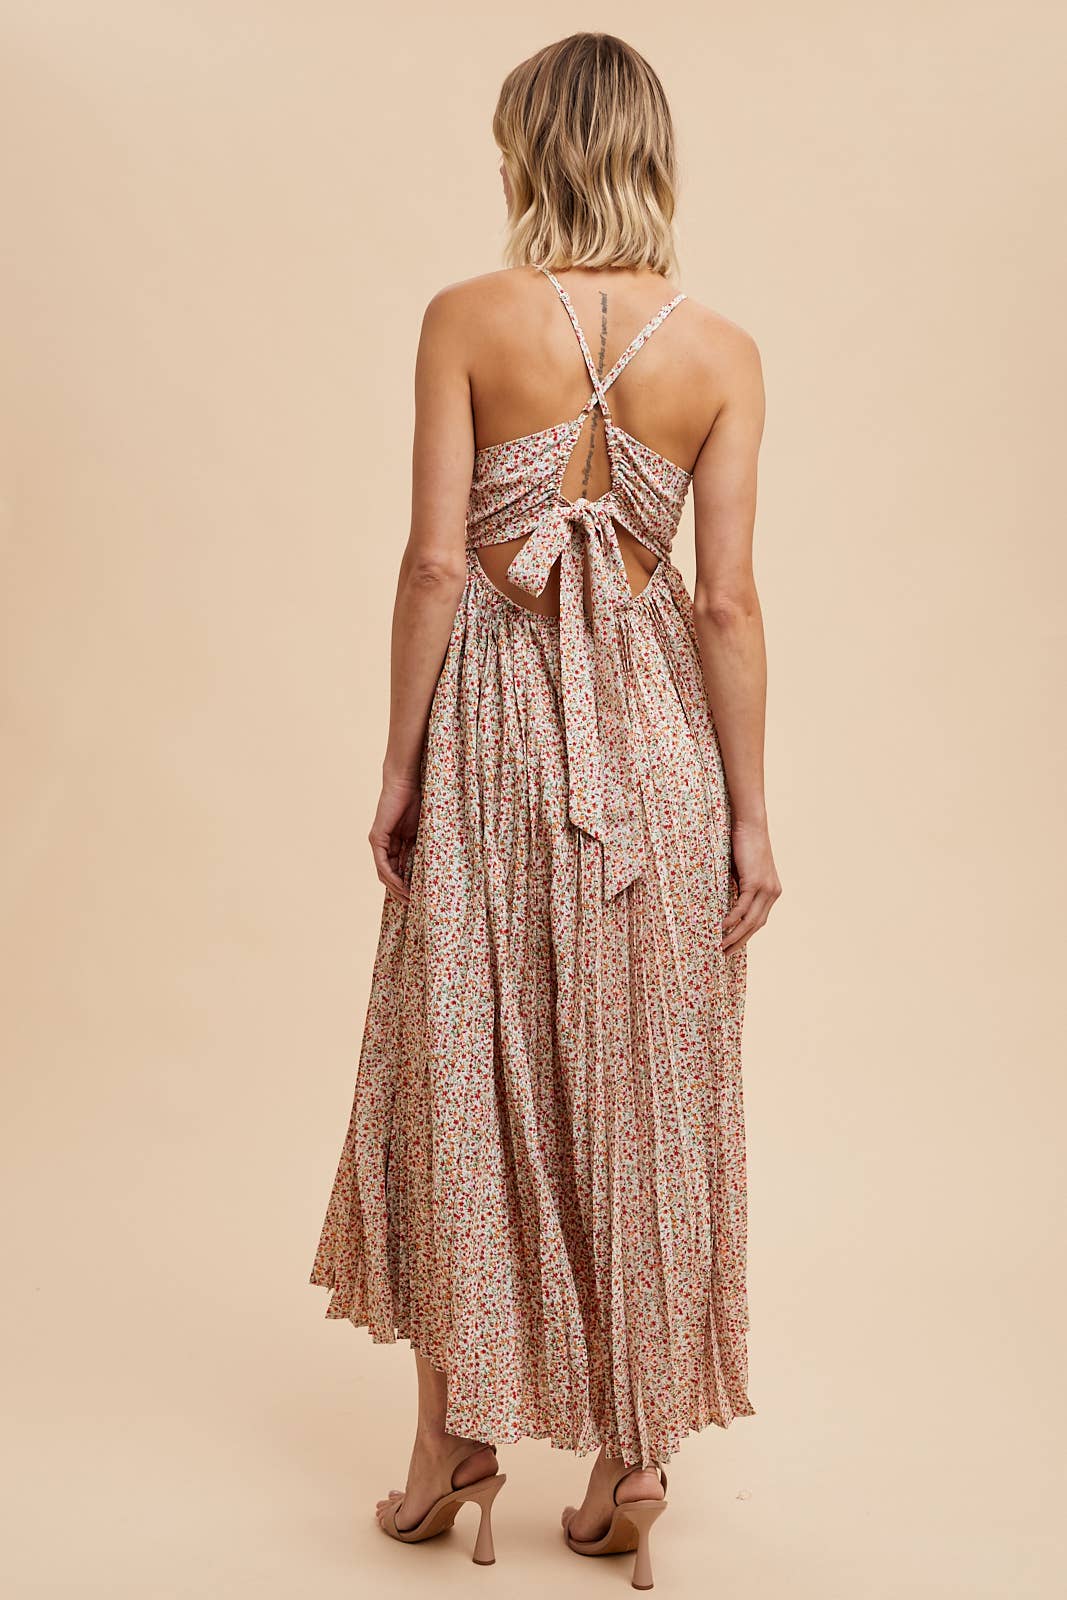 Pleated Floral Maxi Dress: Coral Rose